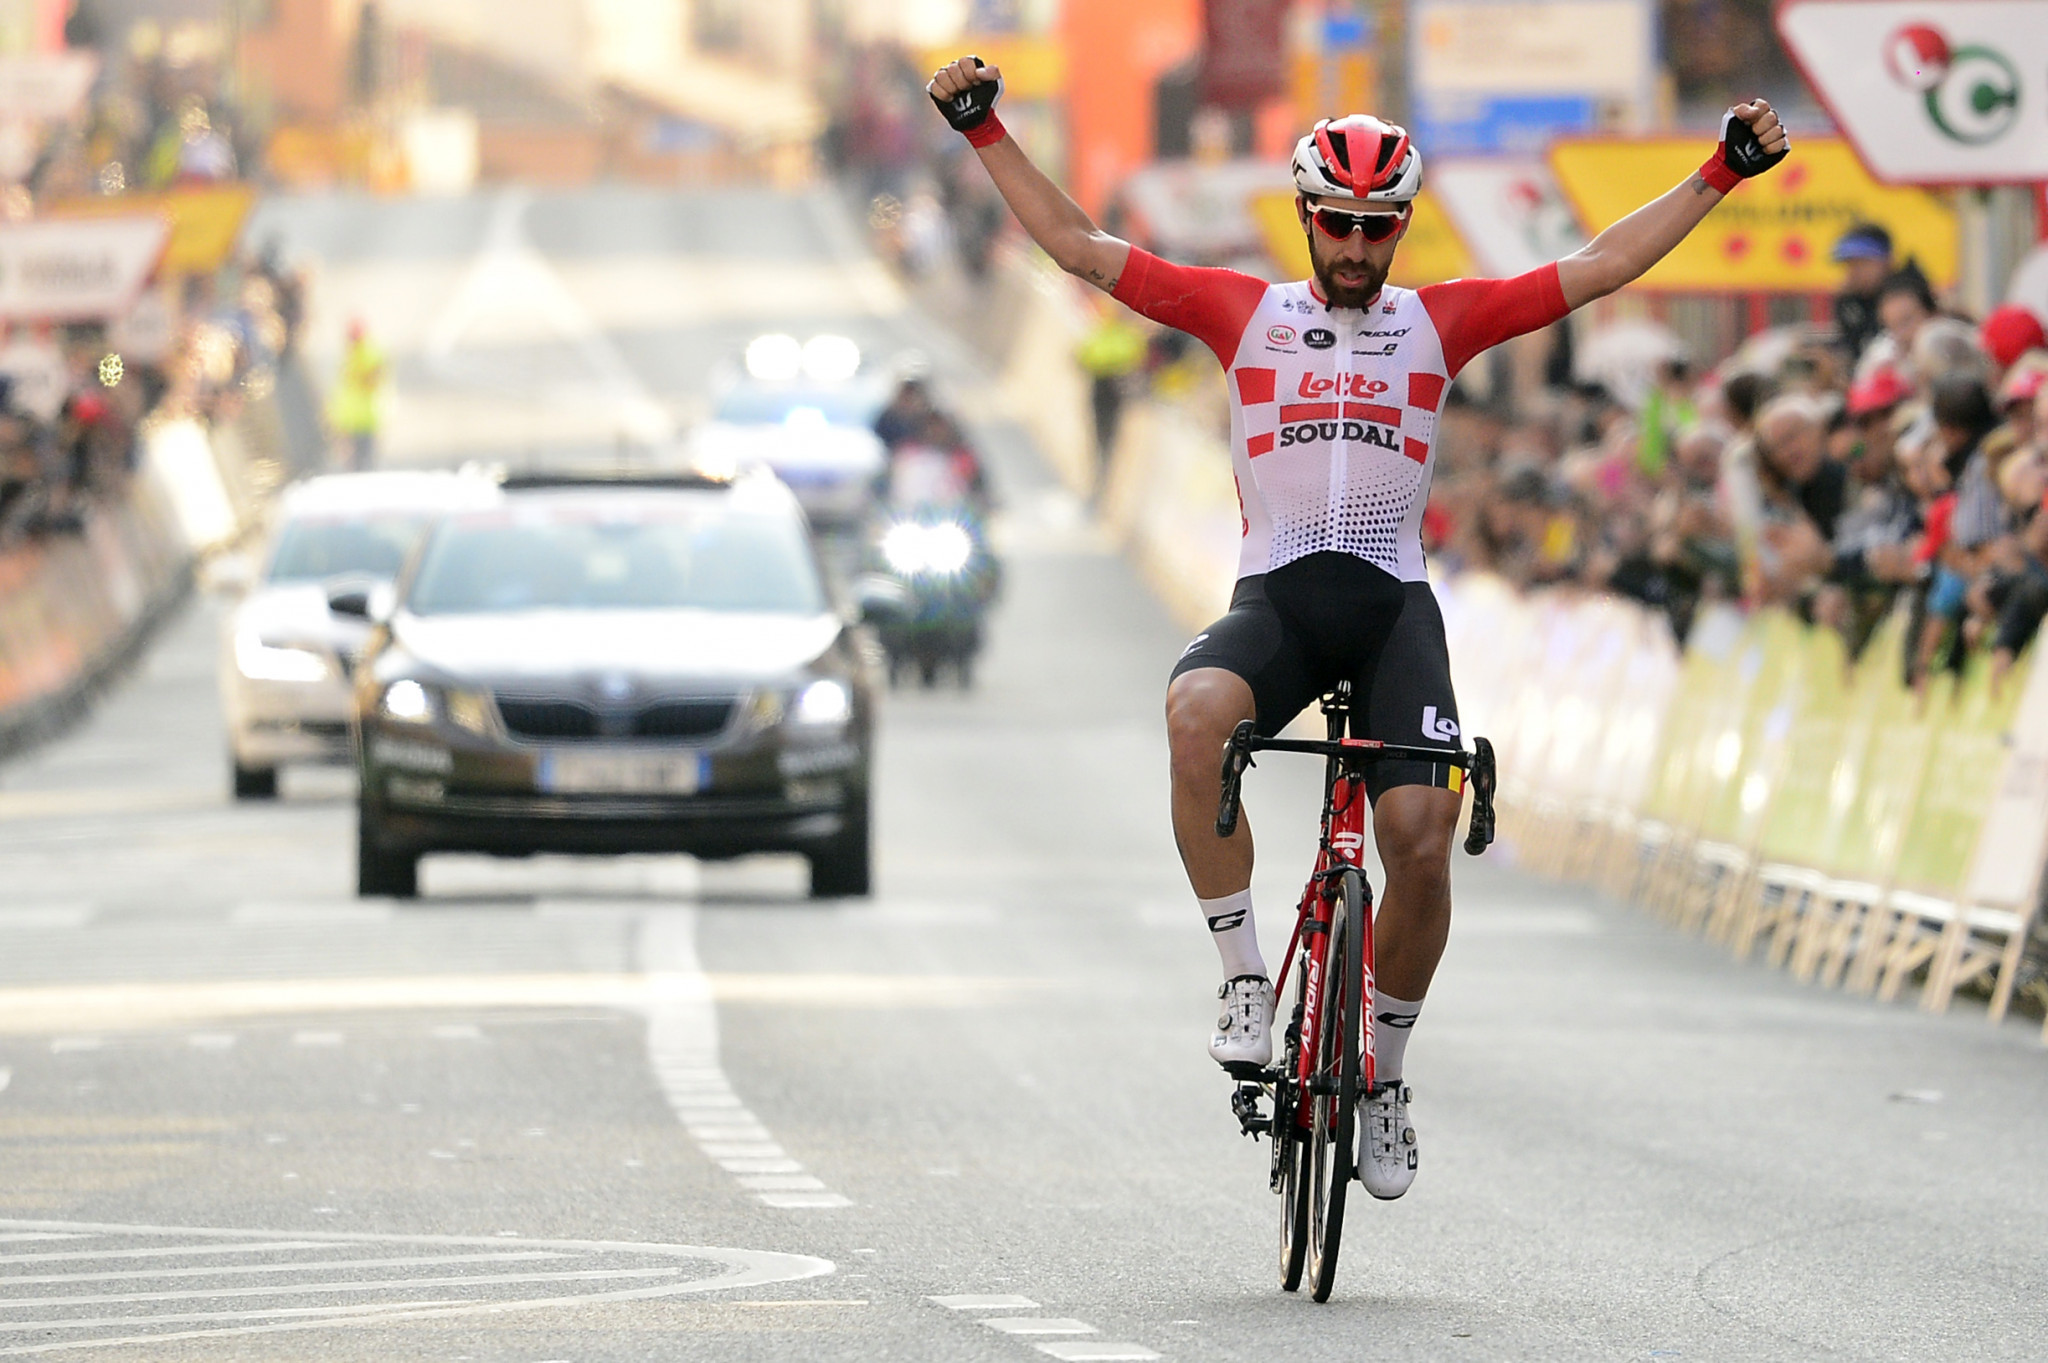 De Gendt wins opening stage of Volta a Catalunya after long range solo attack